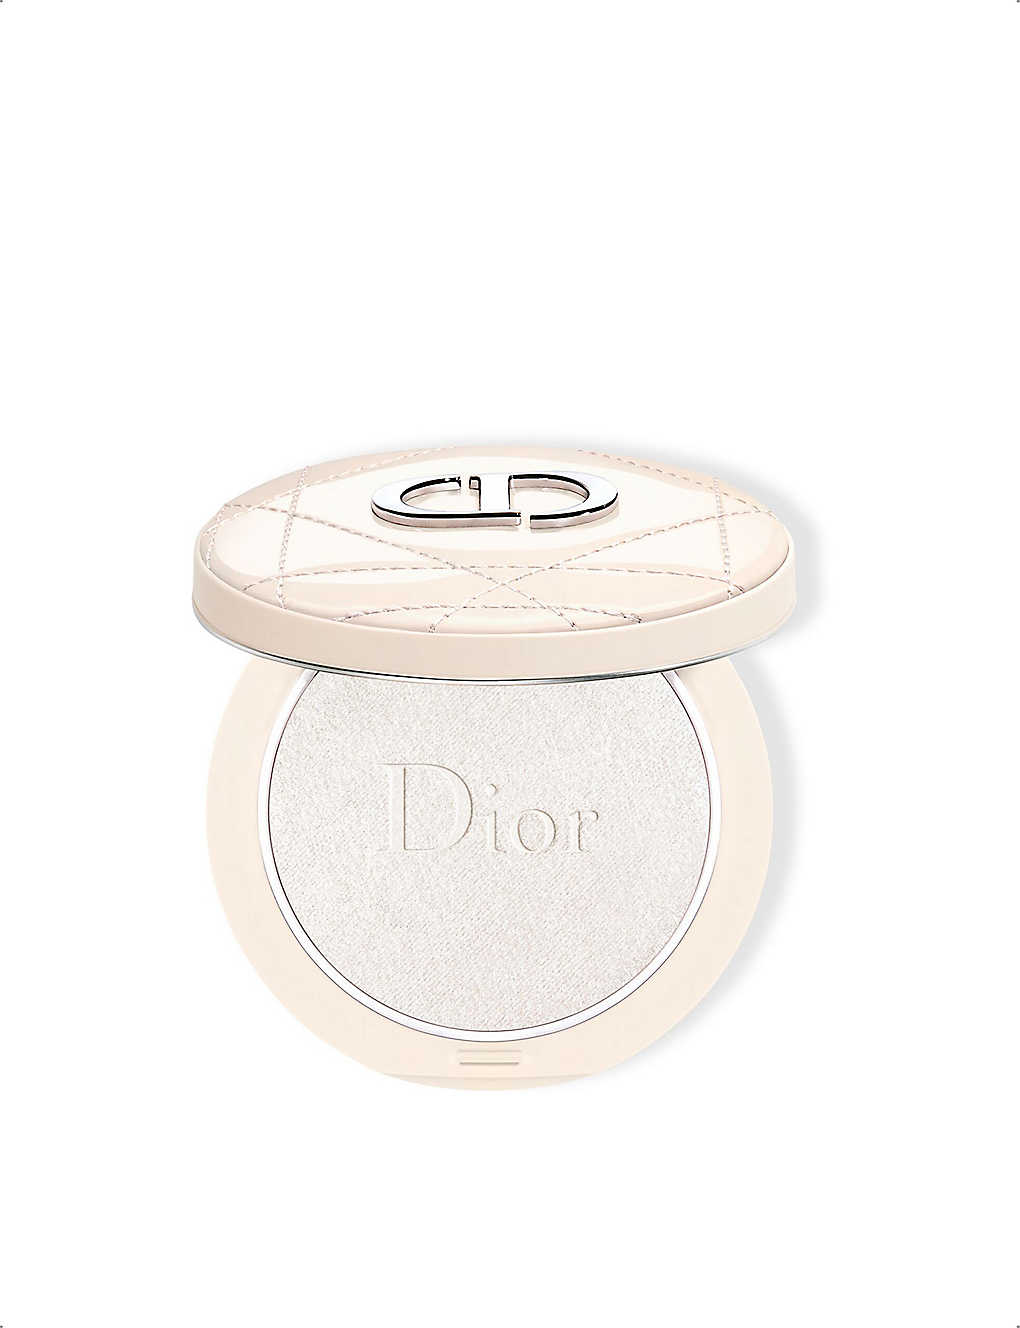 Dior Forever Couture Luminizer Longwear Highlighting Powder 6g In 003